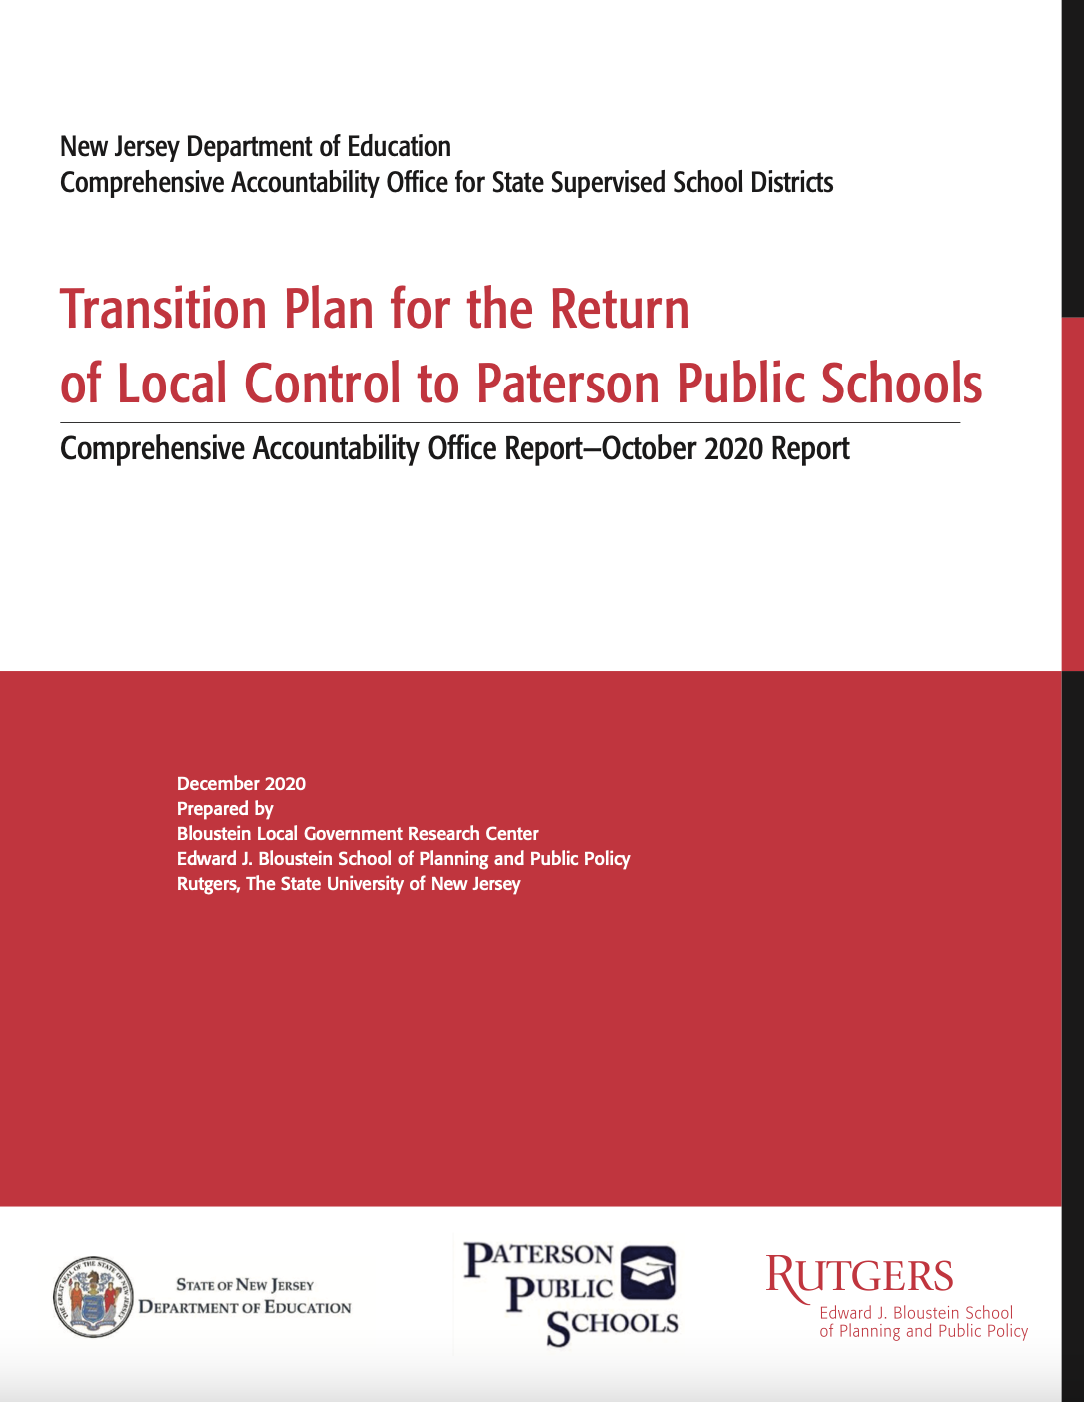 Transition Plan for the Return of Local Control to Paterson Public Schools